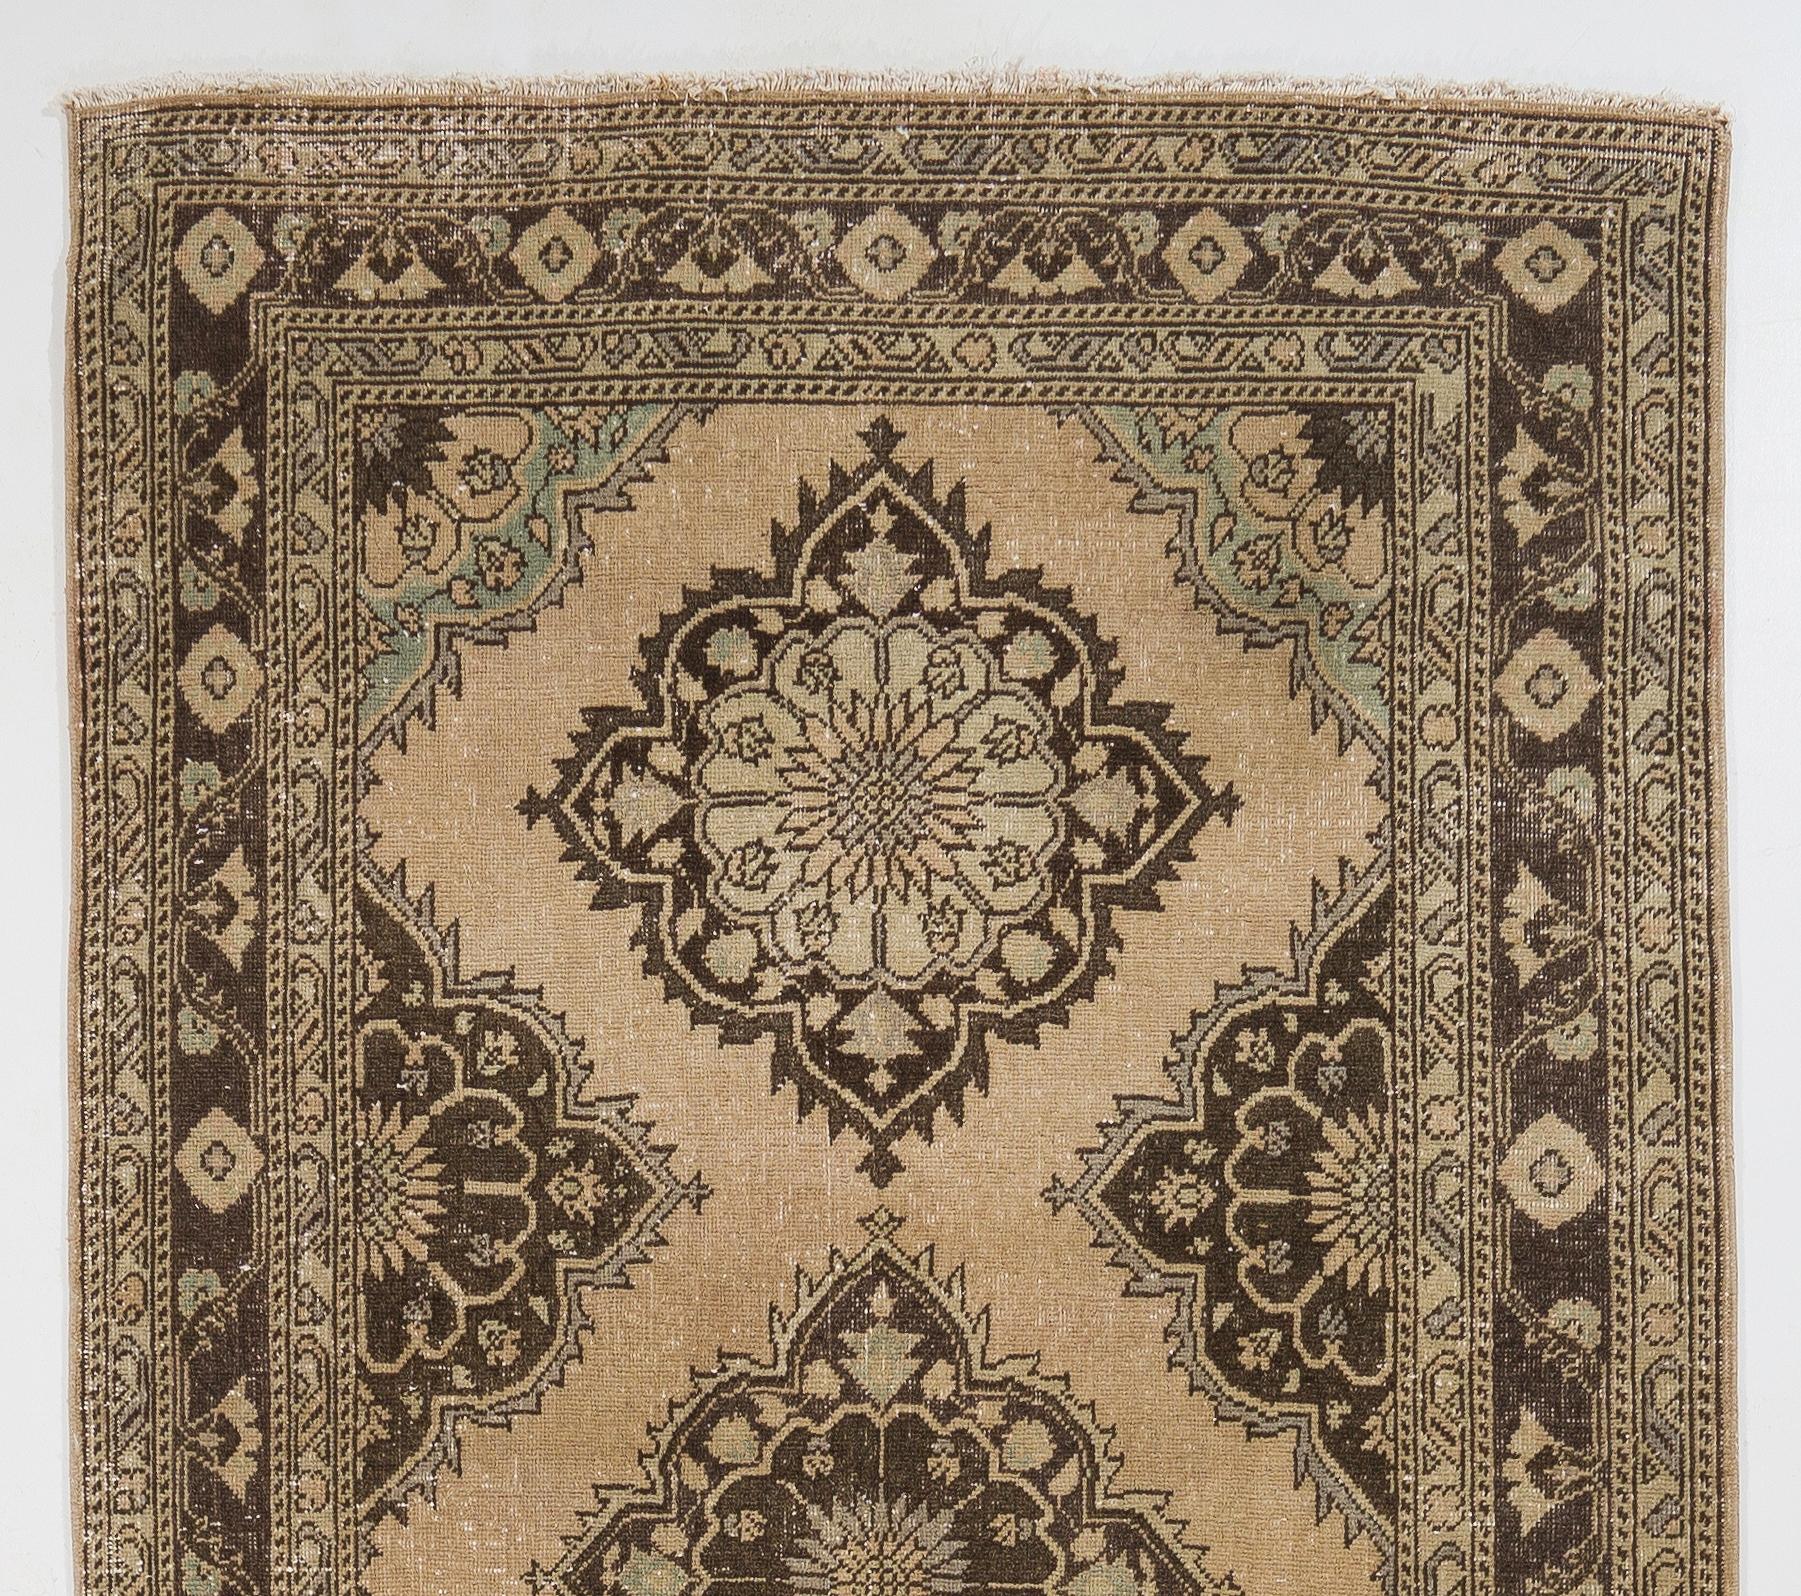 A vintage Turkish runner rug. It was hand-knotted in the 1960s with low wool on cotton foundation and features a multiple medallion design. It is in very good condition, professionally-washed, sturdy and suitable for areas with high foot traffic.